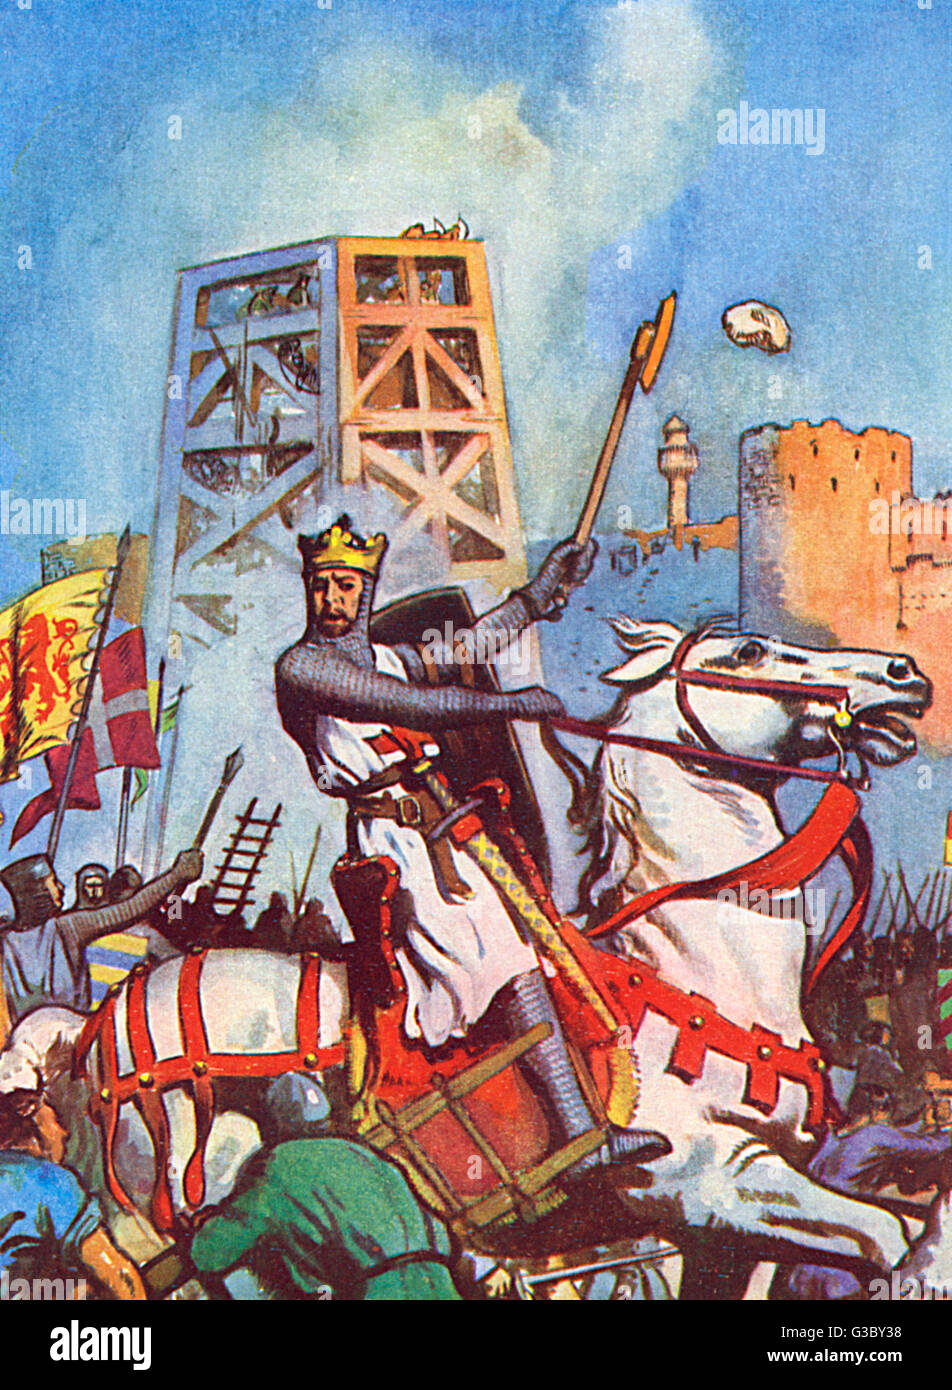 The Siege of Acre was one of the first confrontations of the Third Crusade, lasting from August 28th, 1189 until July 12th, 1191. The Crusader forces were led by King Richard I ('The Lionheart') of England (pictured)      Date: 1191 Stock Photo